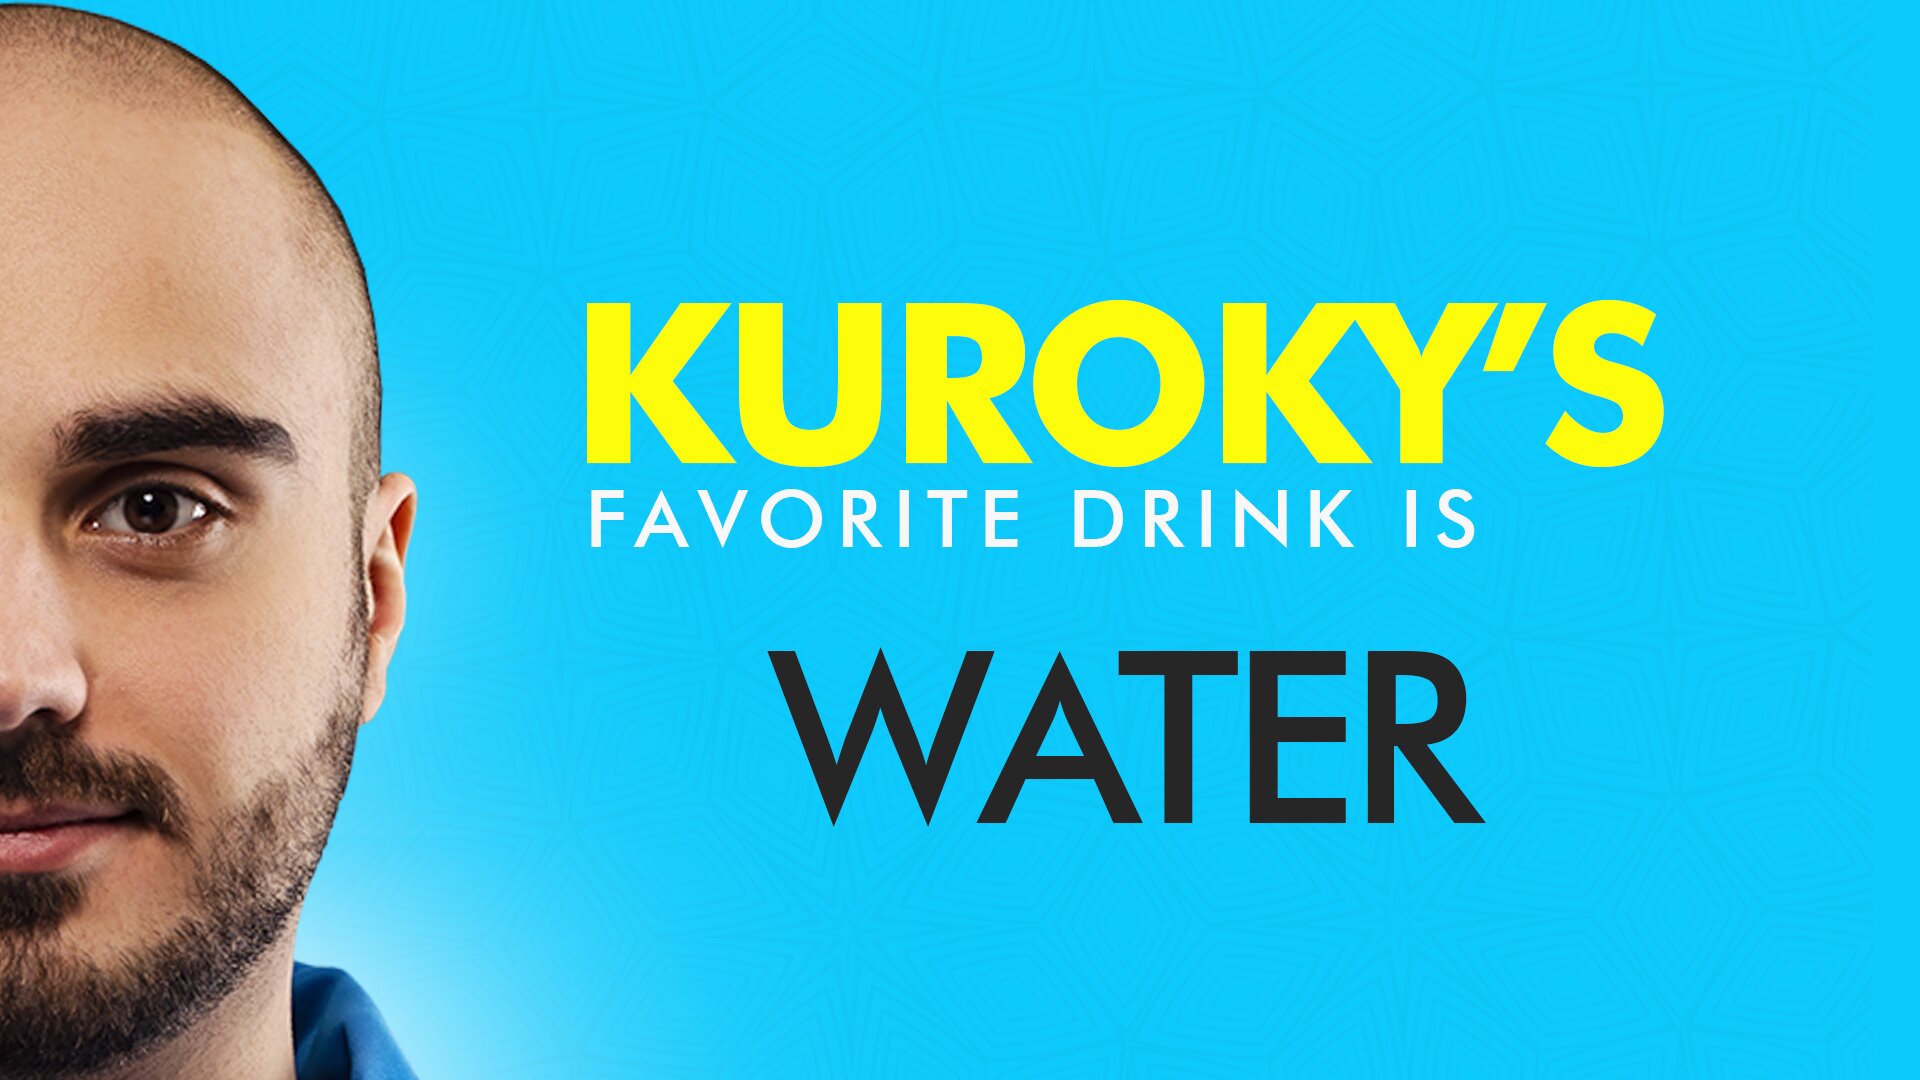 Hours before Team Nigma’s upset loss to Gambit Esports at ESL One LA, we learned what Kuroky’s favorite drink was (Image via Team Nigma)